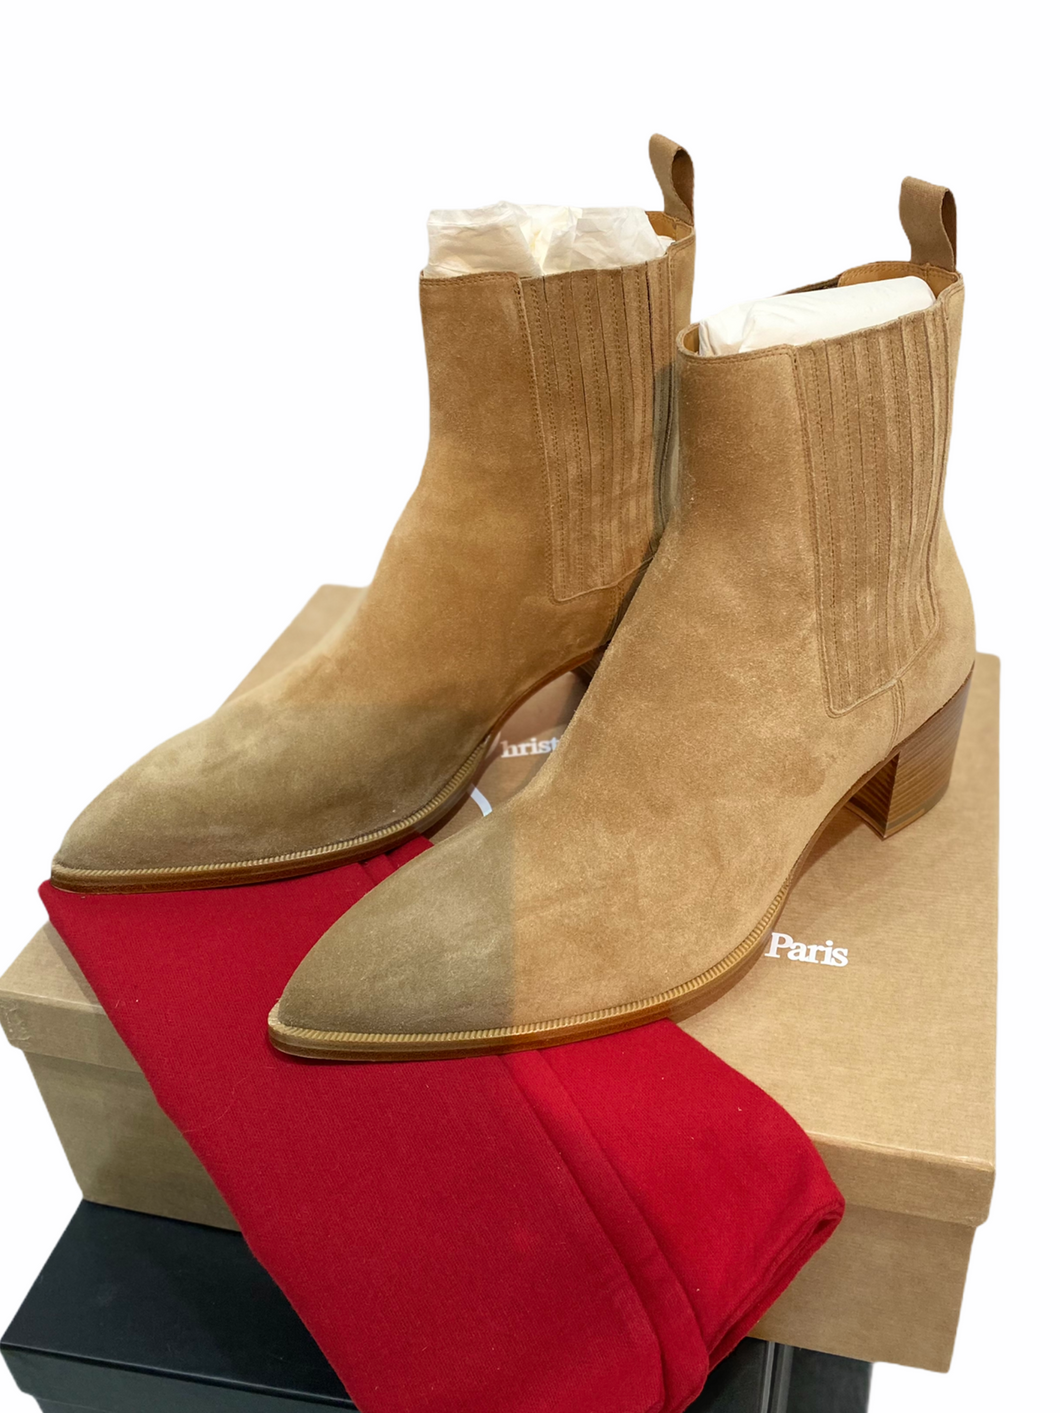 Christian Louboutin Tan Suede Chelsea Boot